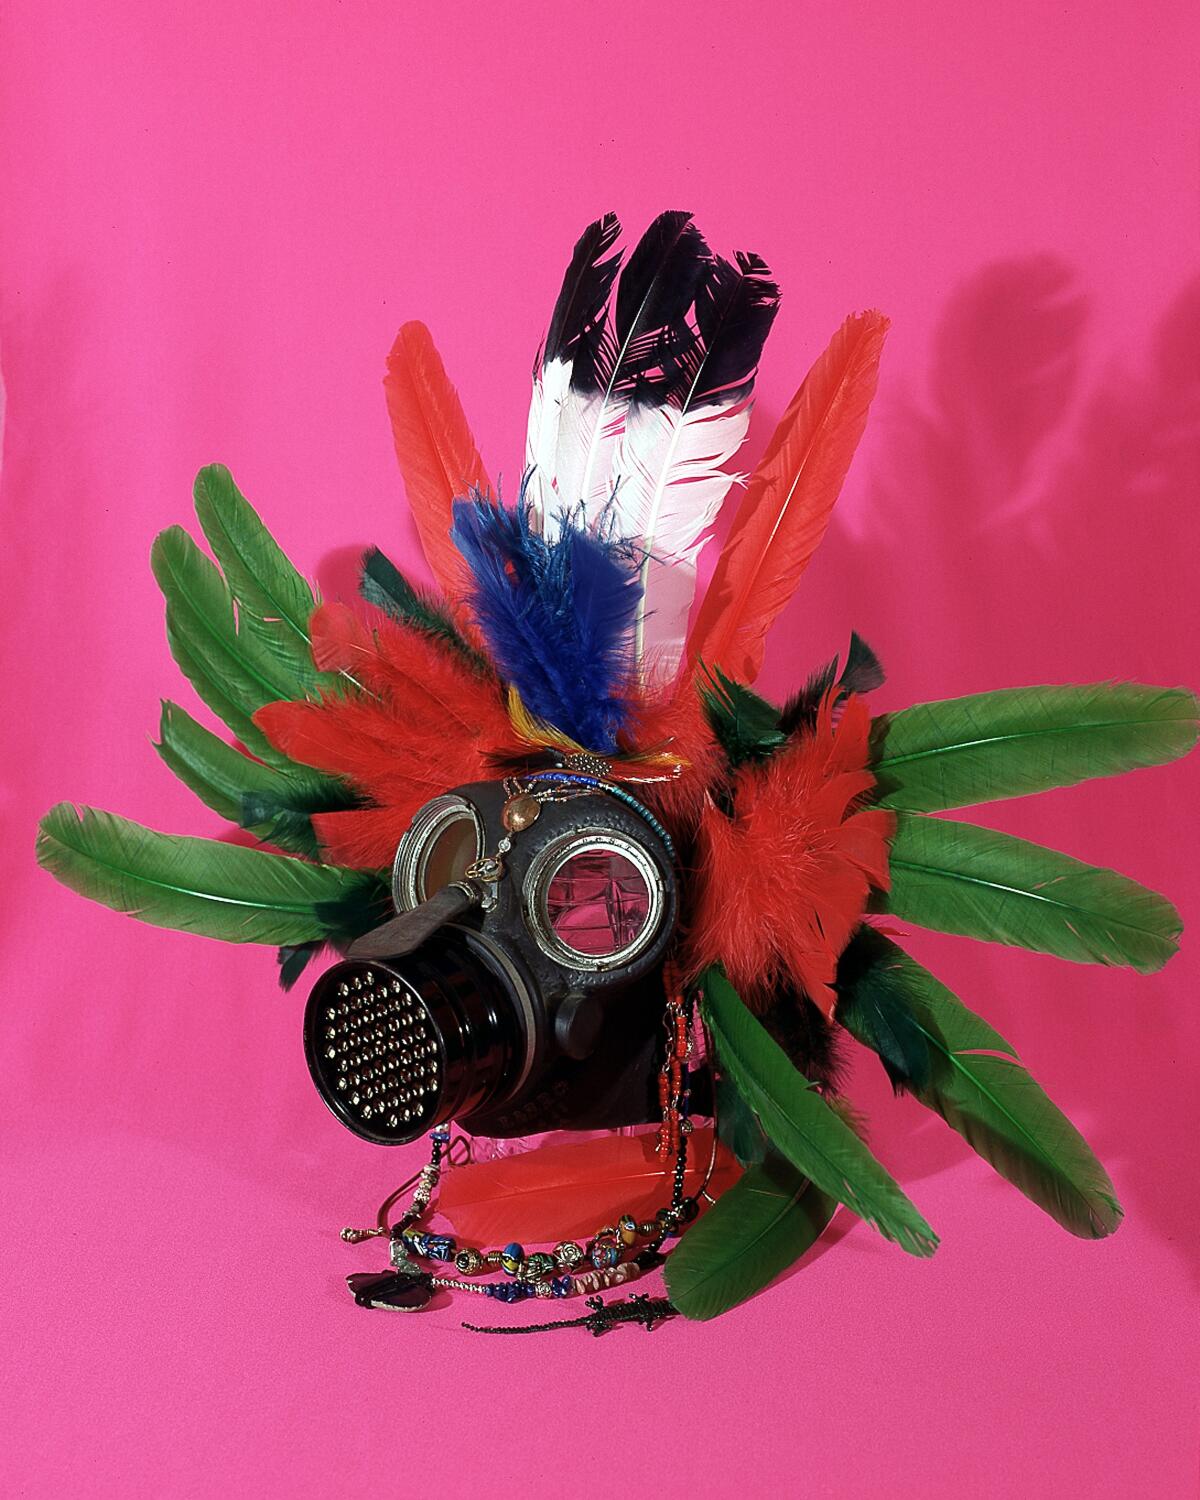 An old gas mask is studded with large, soft feathers, with strings of beads that dangle from the area around the temples